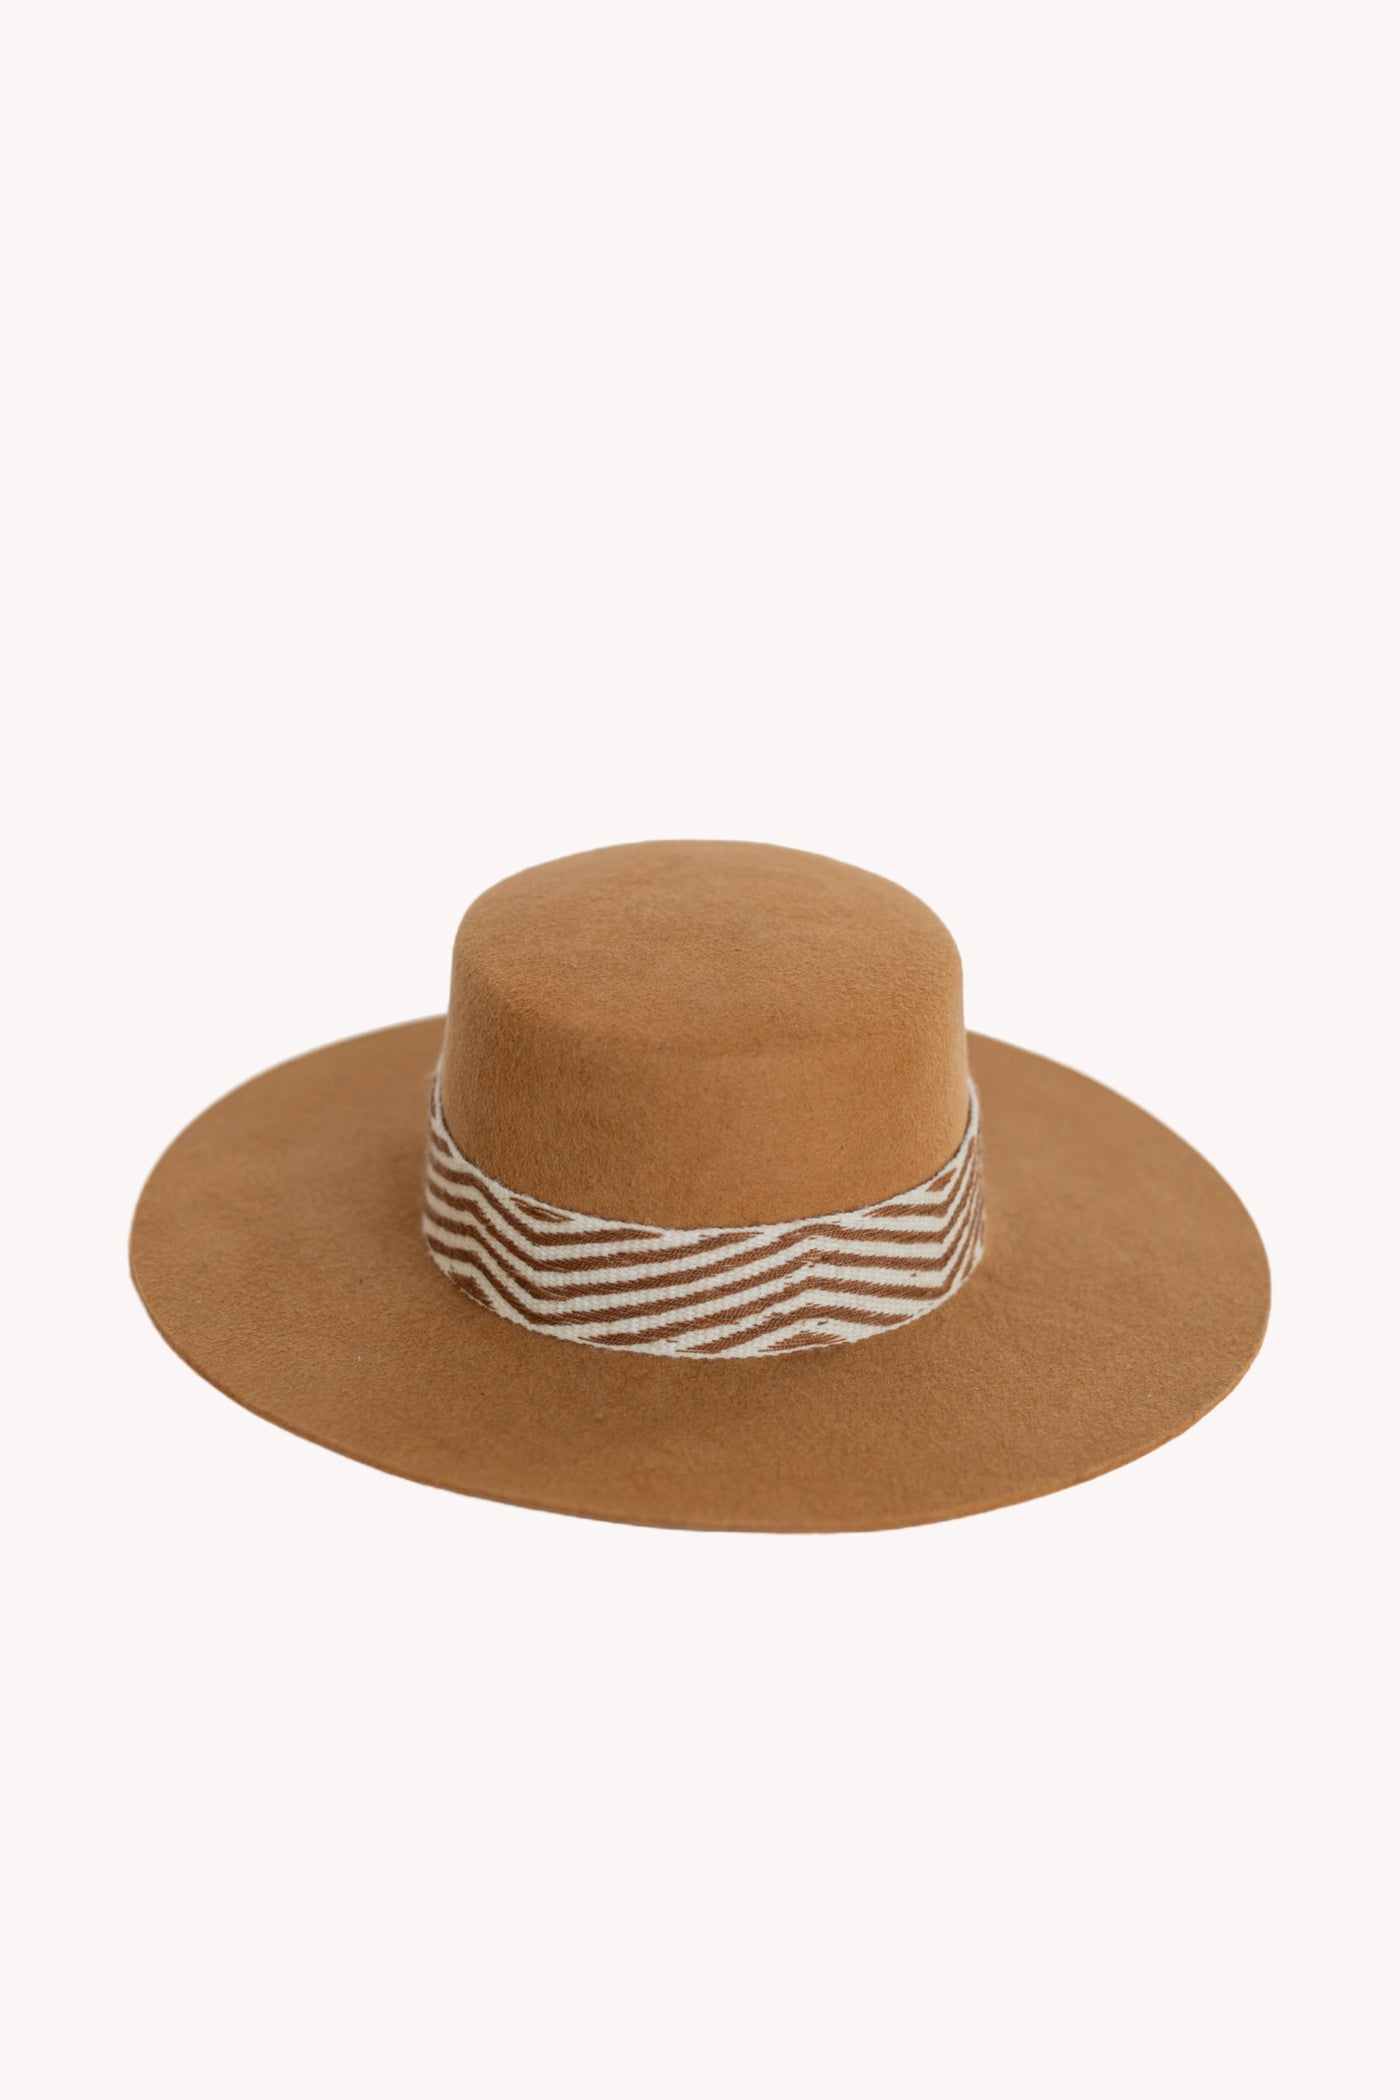 Camel Spanish Hat with Surrender Intention Band Removable Intention Hat Textile Band